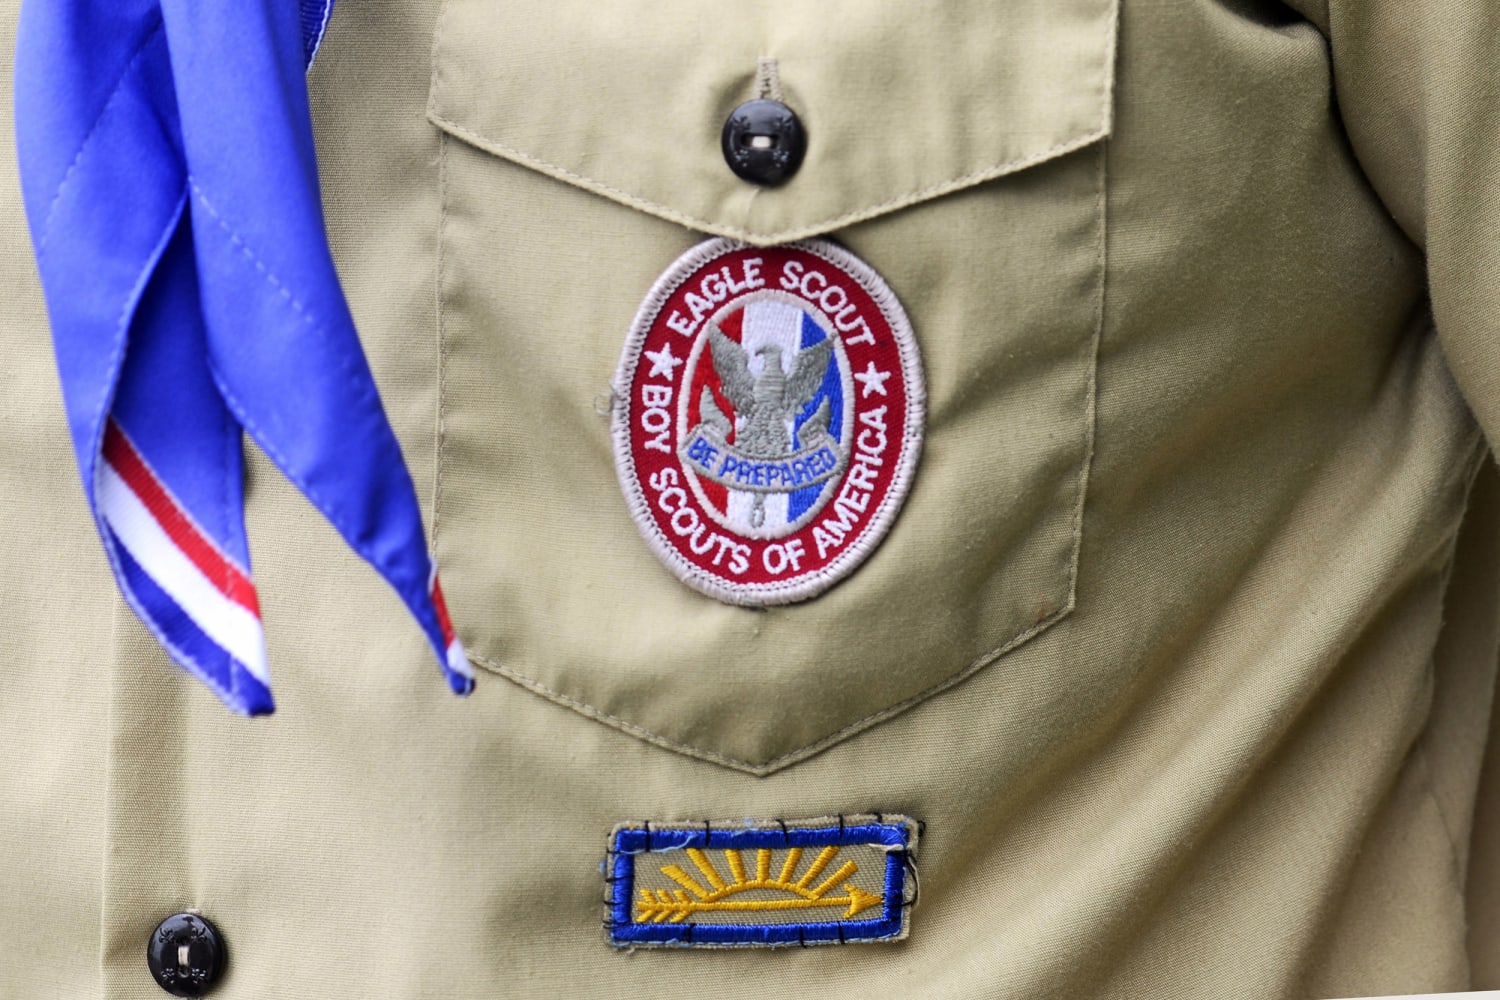 Boy Scouts secure $800 million from Chubb insurer for sex abuse settlements